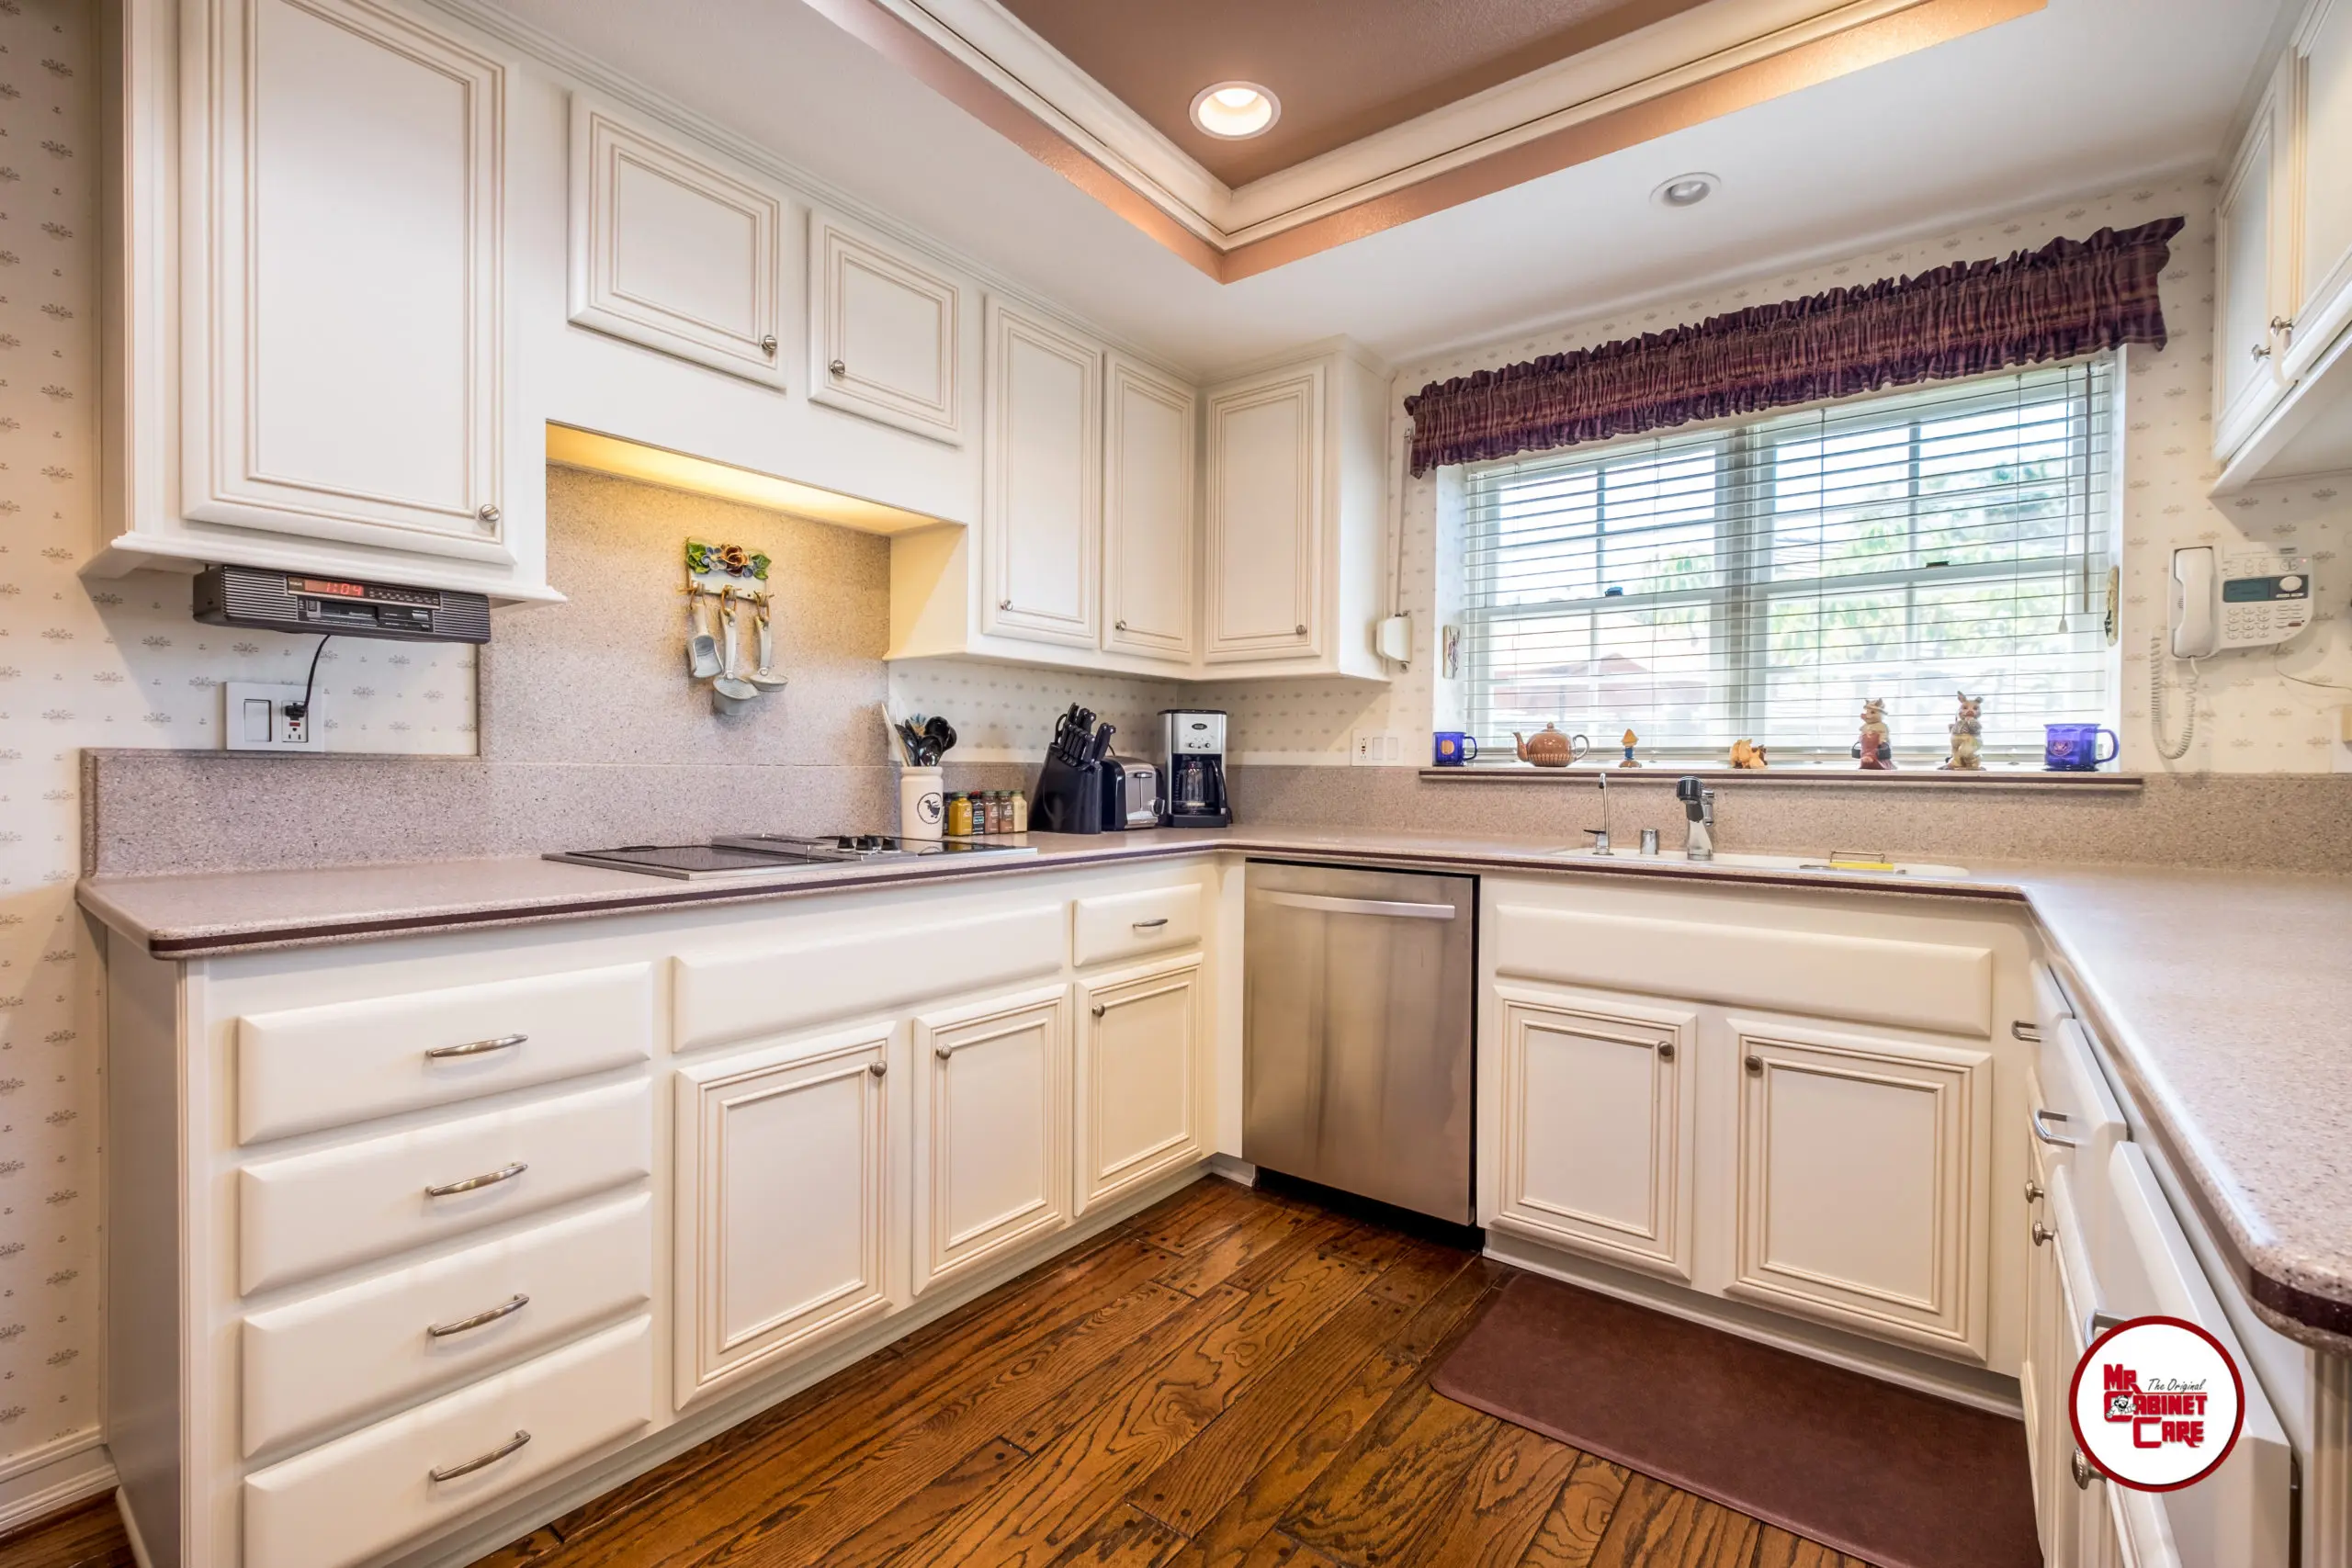 Breaking Down The Costs Of Cabinet Refacing, How Much Does It Cost To Refinish Cabinet Doors